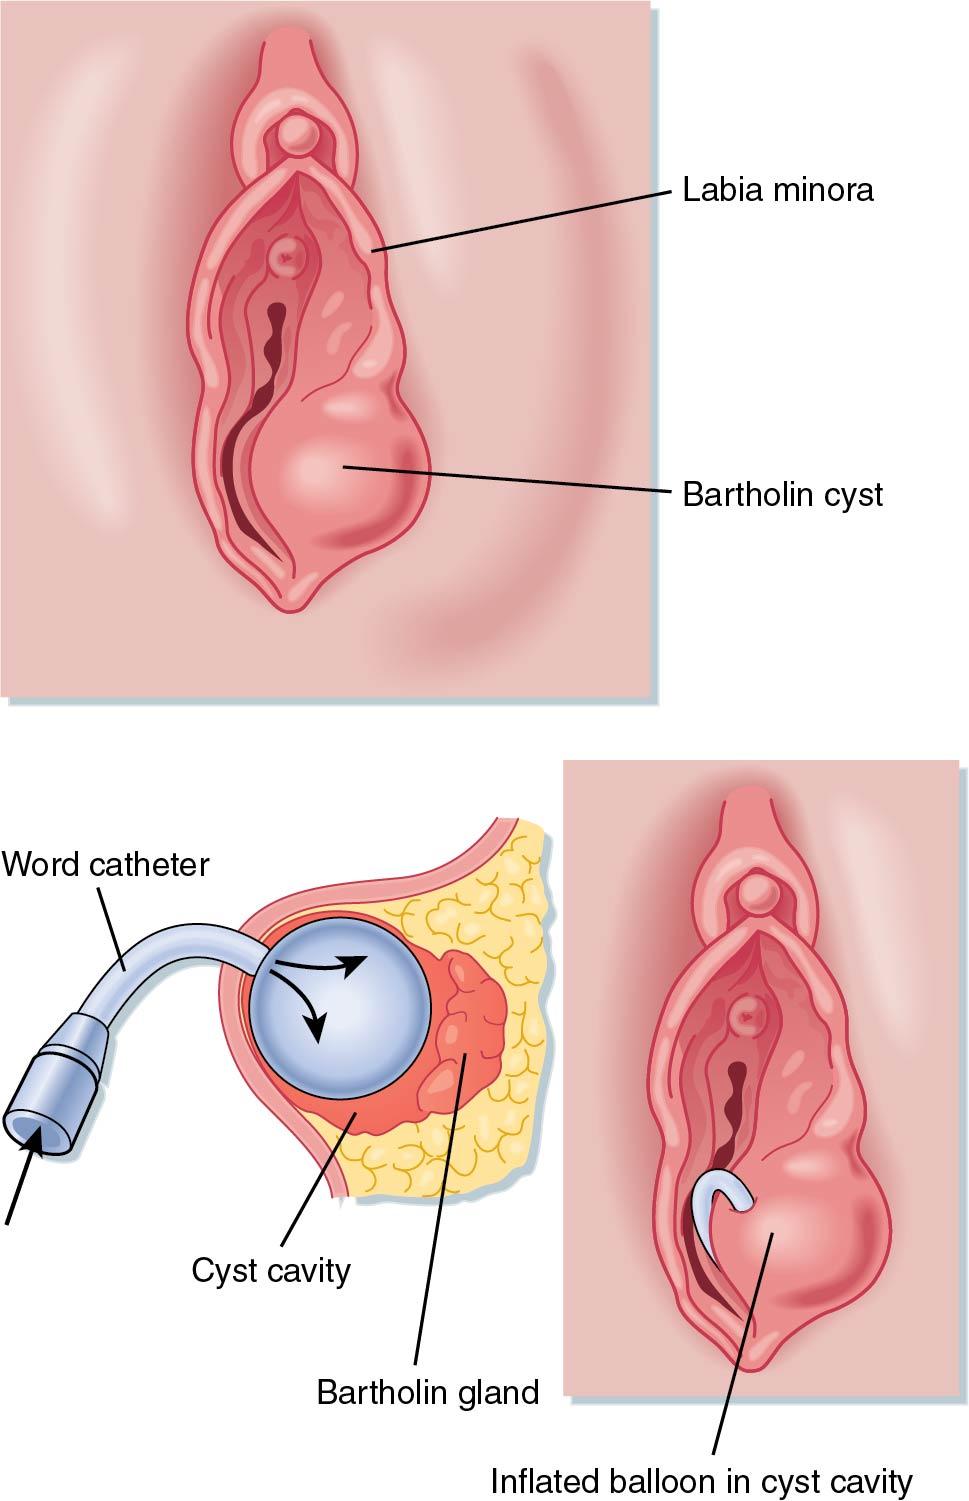 Fig. 3.5, A no. 11 scalpel incision is made inside the hymenal ring, making the opening just large enough to insert the Word catheter. The balloon is then inflated within the cavity of the cyst.